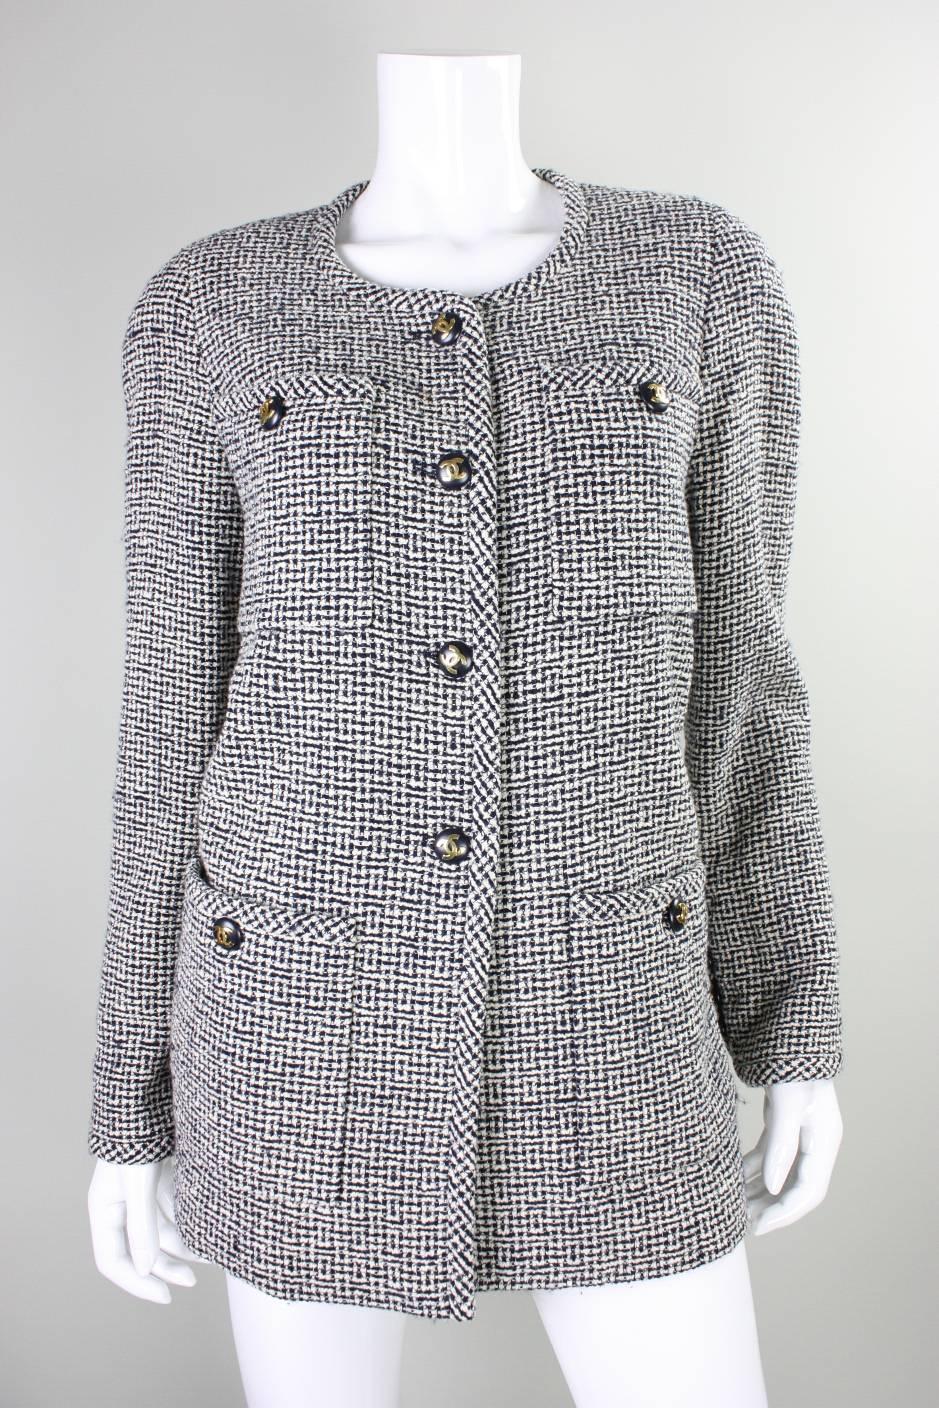 Vintage jacket from Chanel is made of black & white wool boucle and dates to the 1980's.  It features four front patch pockets and a center front closure.  All buttons have gold-toned interlocking C's.  Double back vents.  Fully lined.
Labeled size